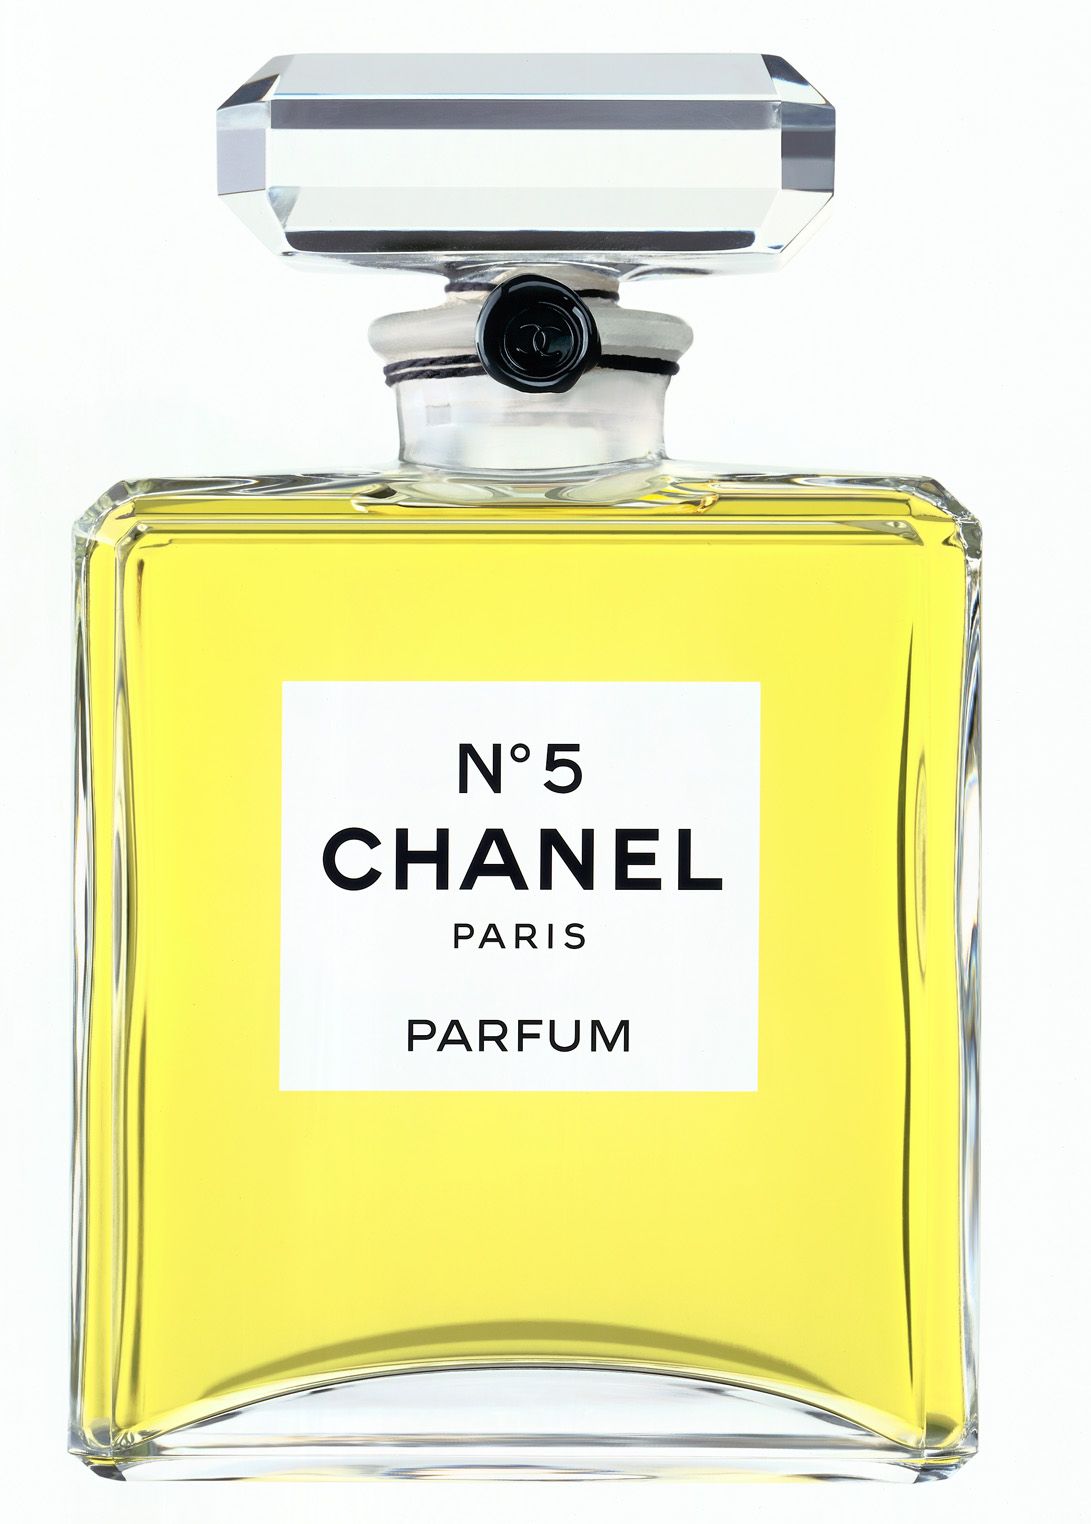 History of Famous Perfumes - The Stories Behind Chanel No 5